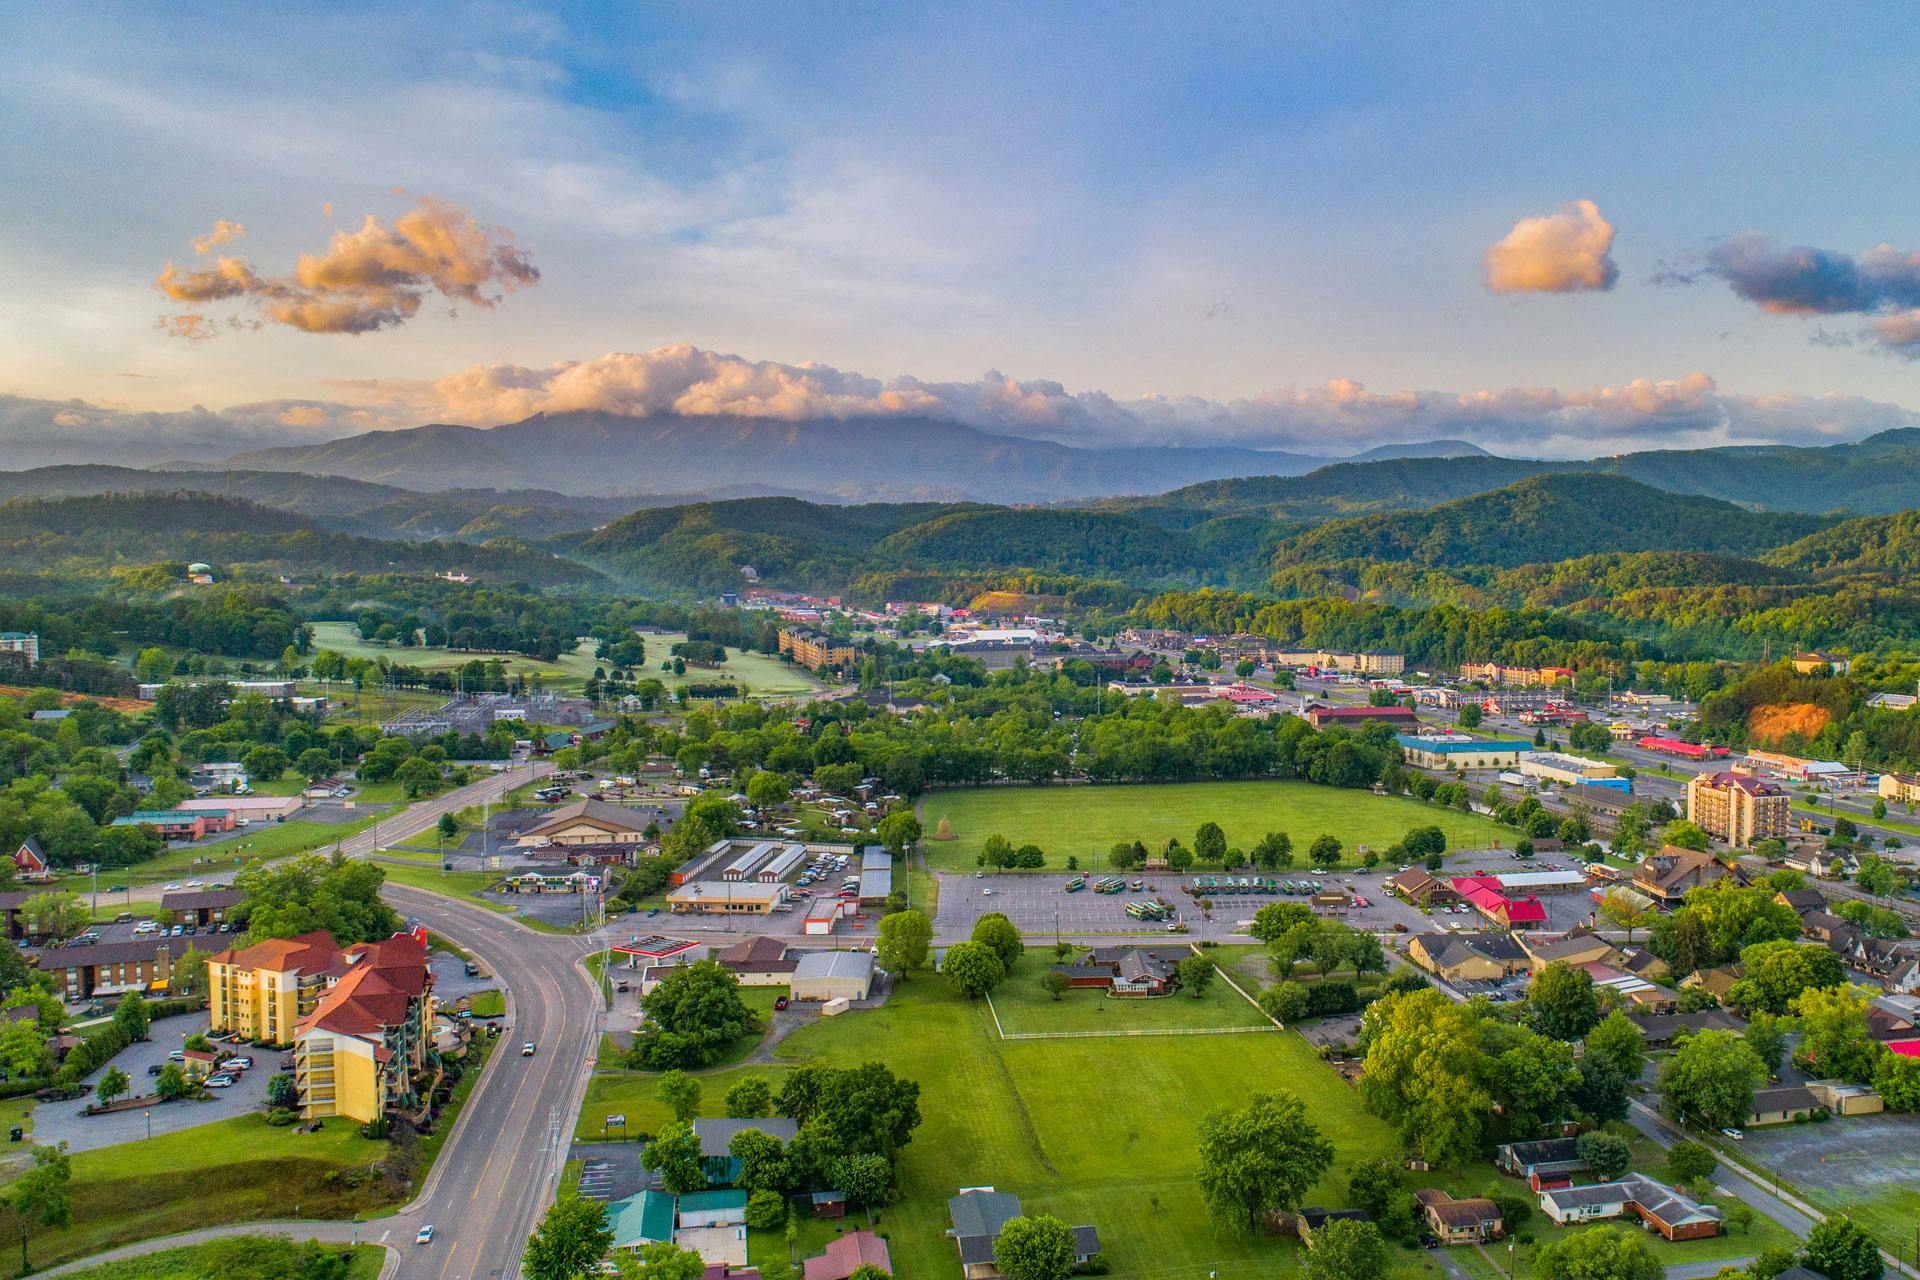 The Best Camping Near Pigeon Forge, Tennessee